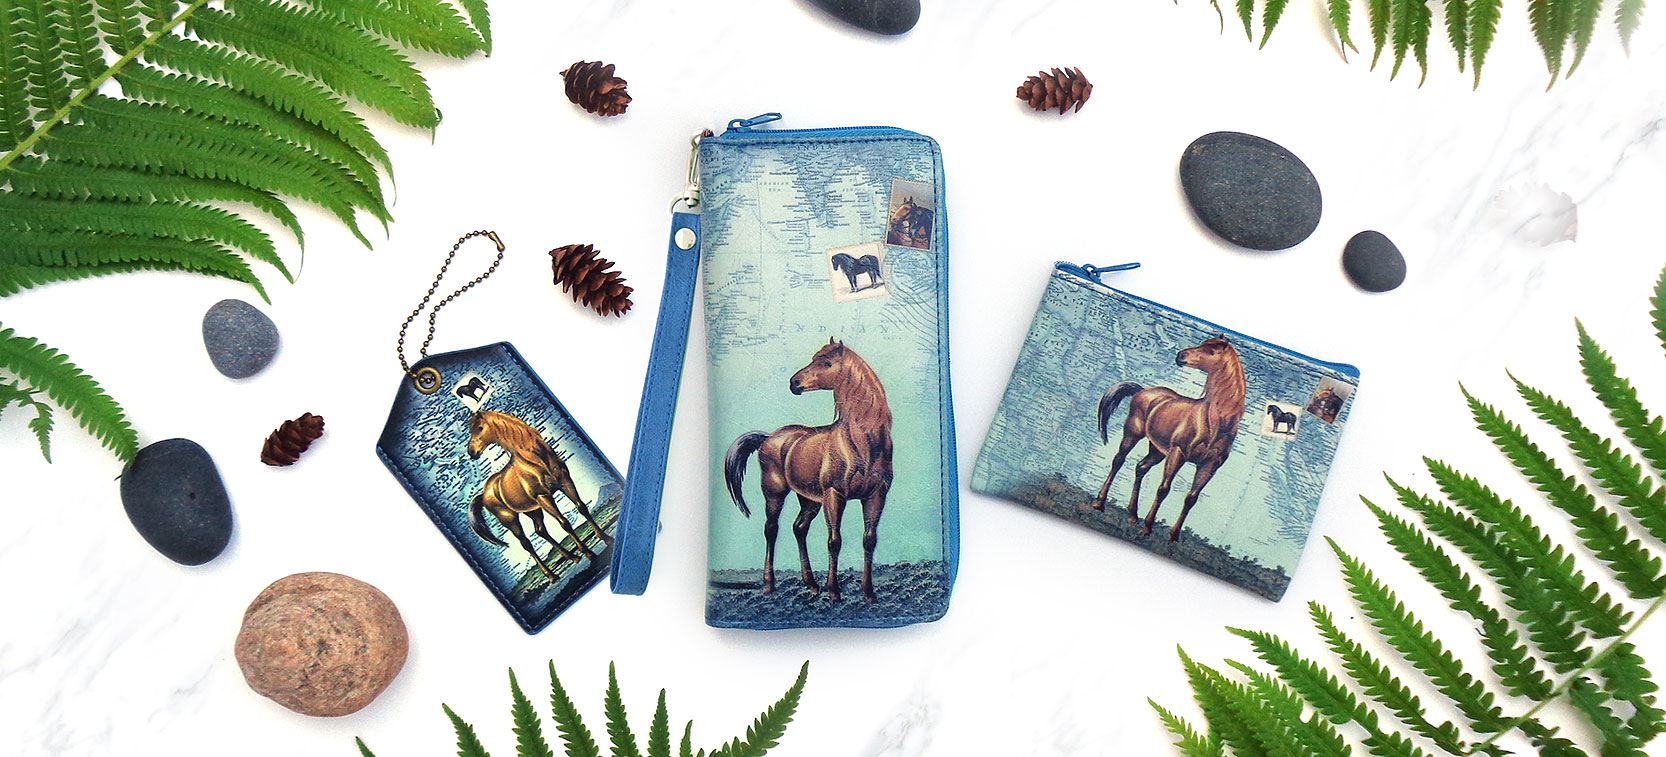 LAVISHY design and wholesale horse themed vegan fashion accessories and gfits to gift shops, boutiques and book stores in Canada, USA and worldwide.